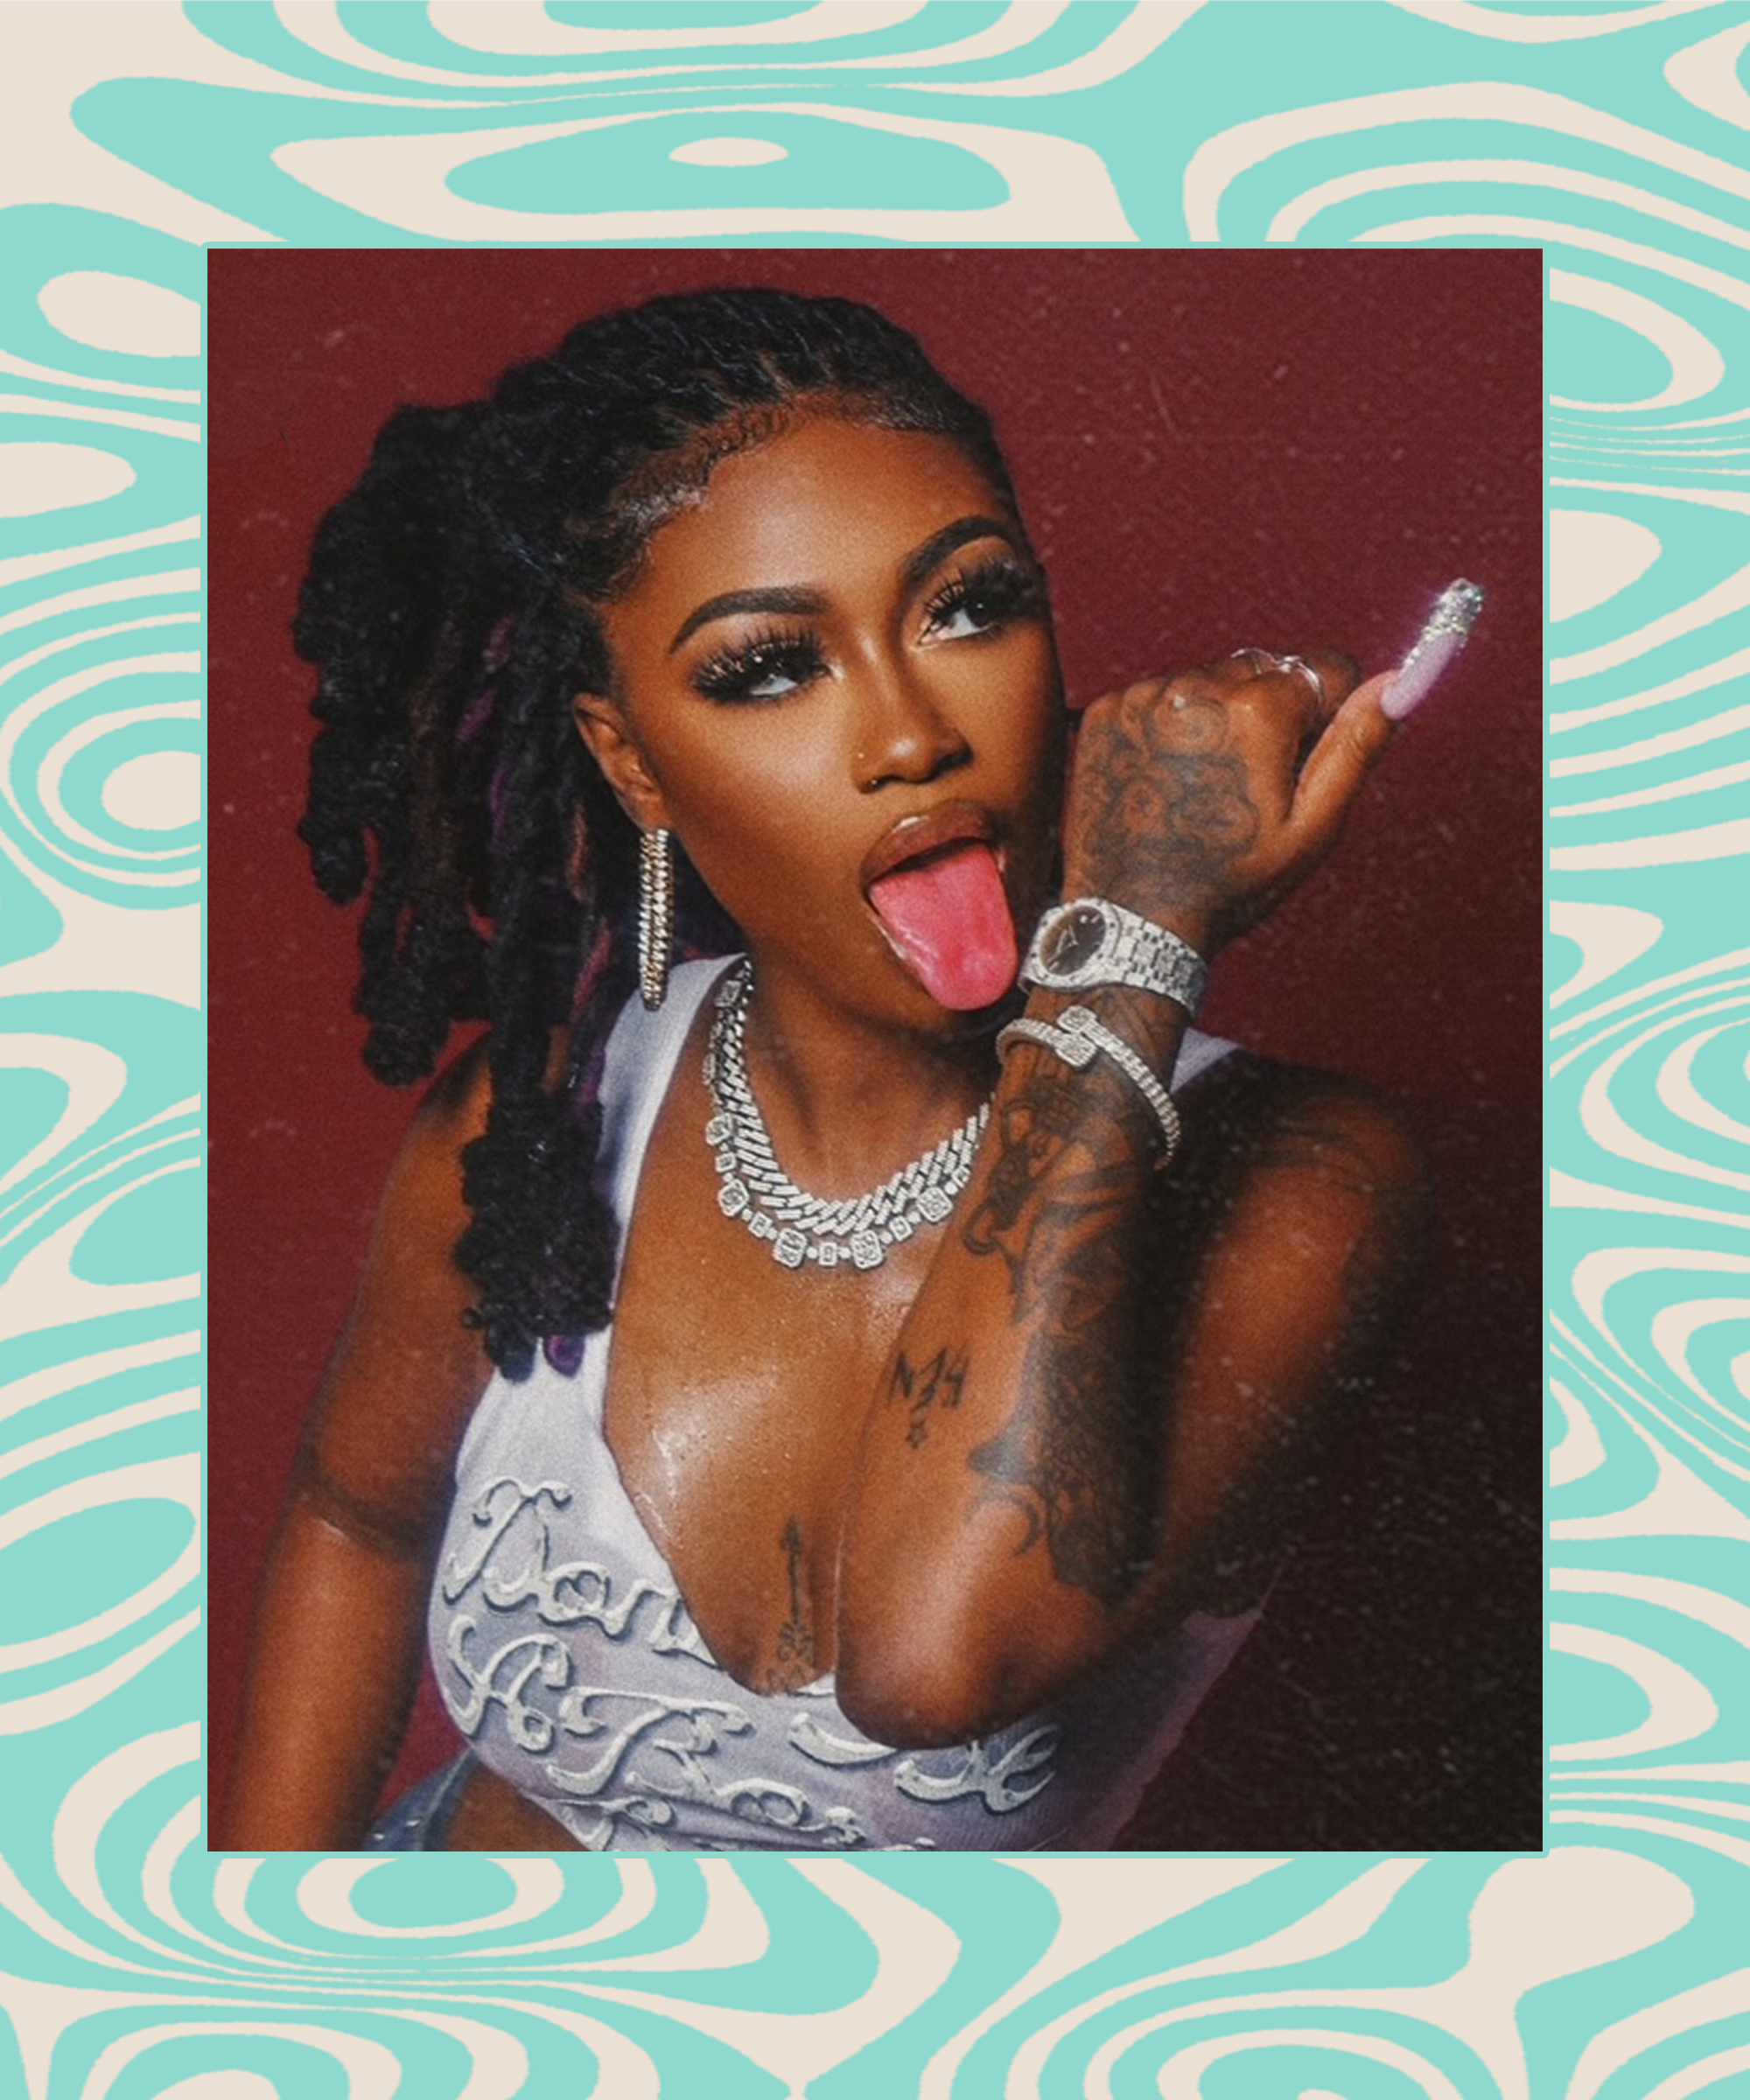 Go Off, Sis: Rapper Kali On Scammers, Finessing & Music